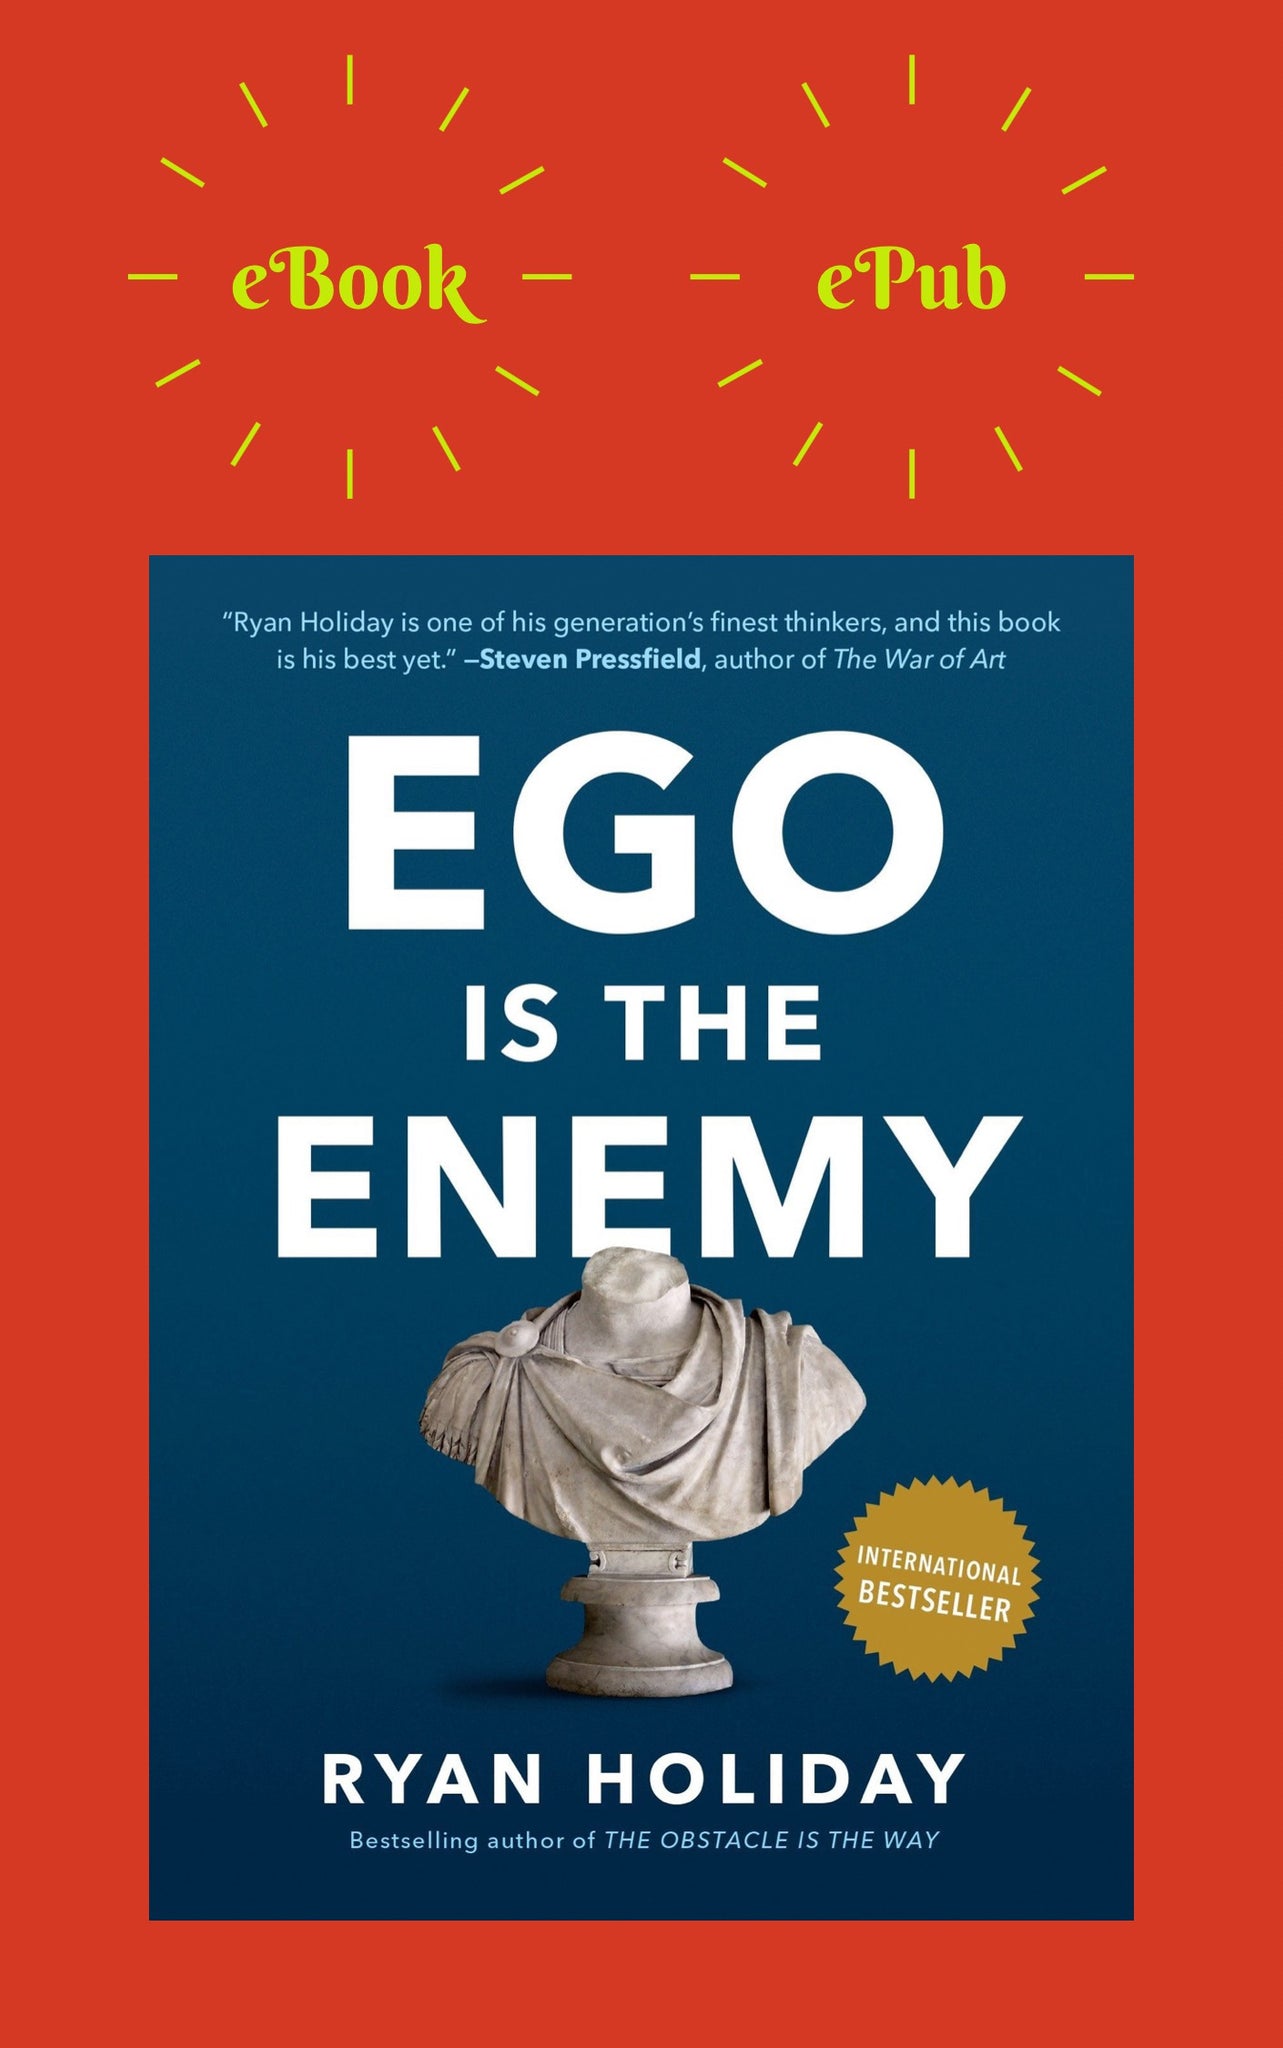 the ego is the enemy